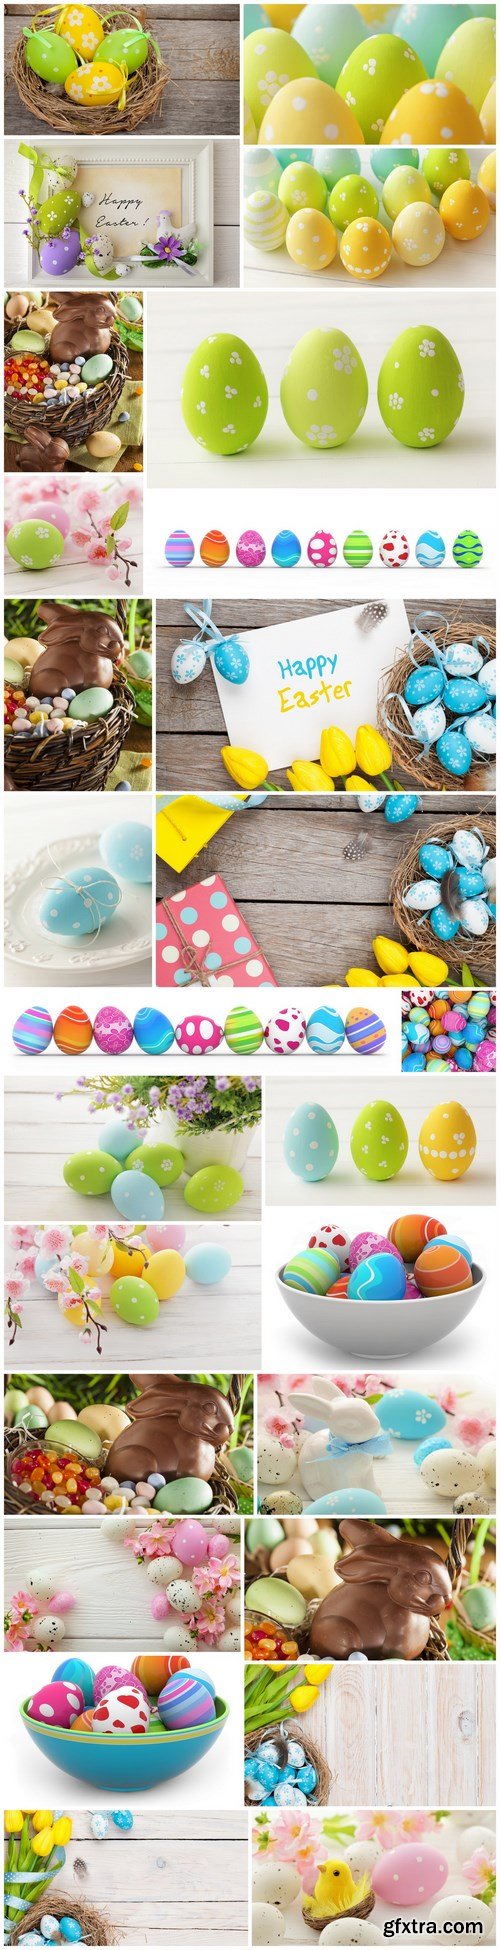 Easter Eggs and Happy Easter 2 - Set of 26xUHQ JPEG Professional Stock Images